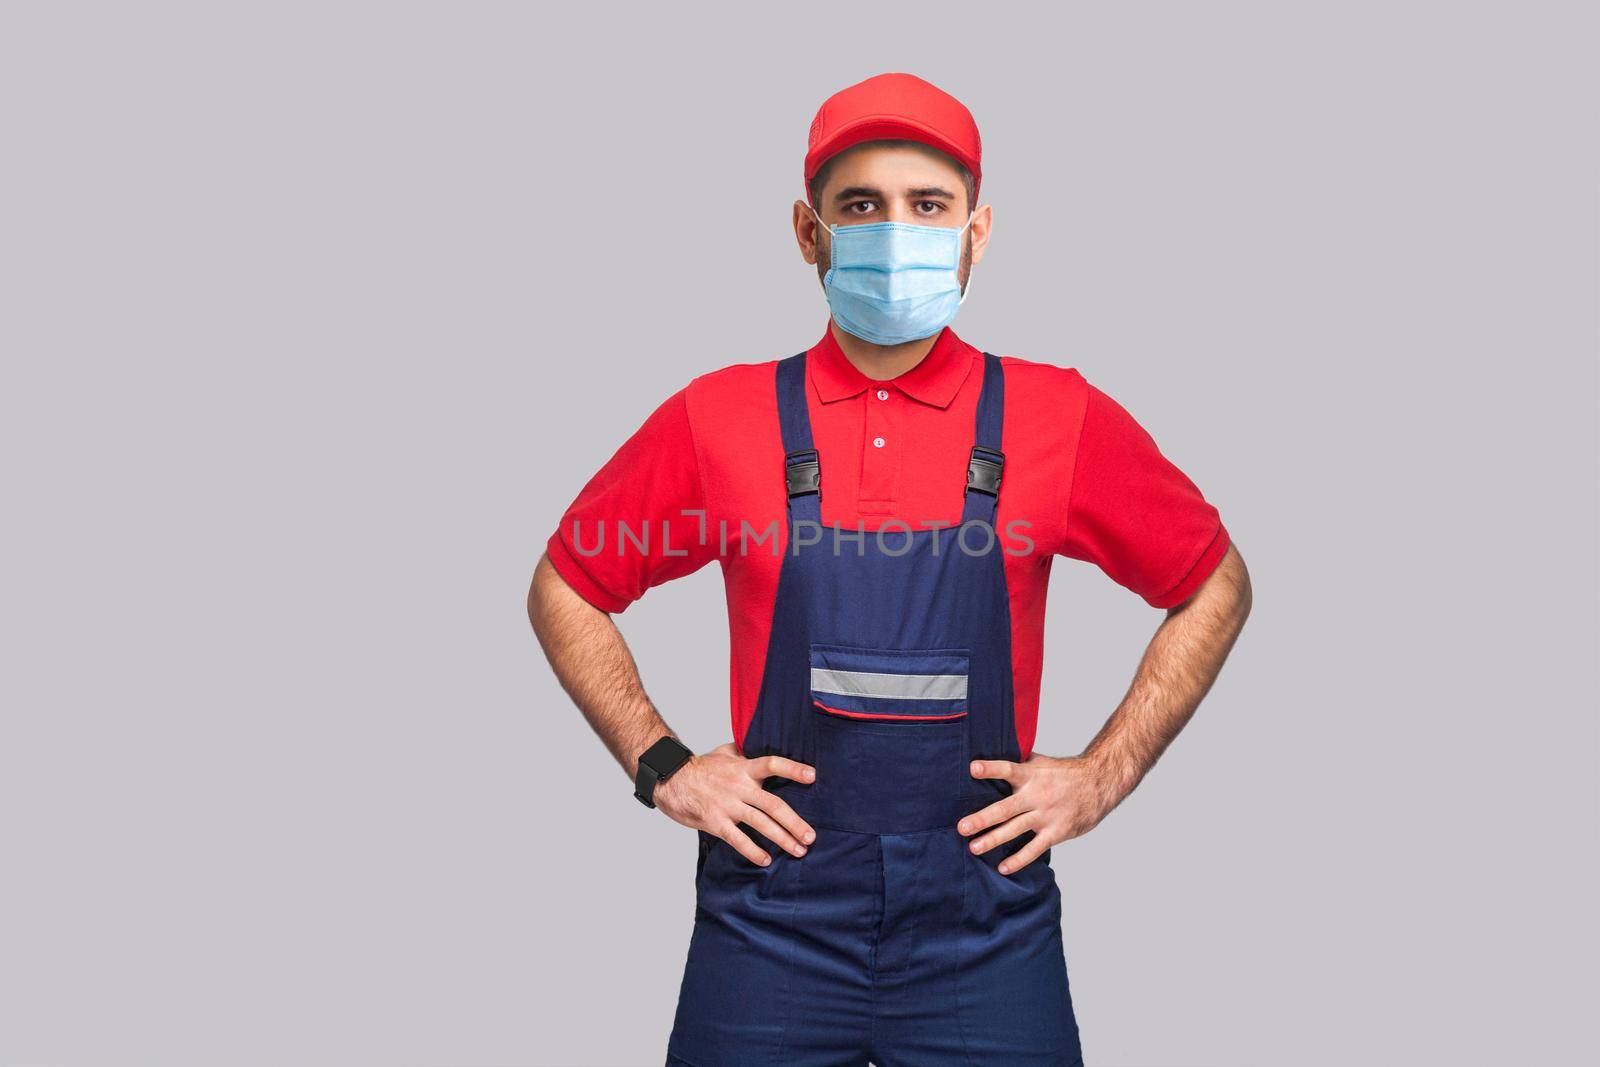 Portrait of young man with surgical medical mask in blue overall, red t-shirt and cap standing and holding hands on waist and looking at camera, indoor, studio shot, isolated on gray background